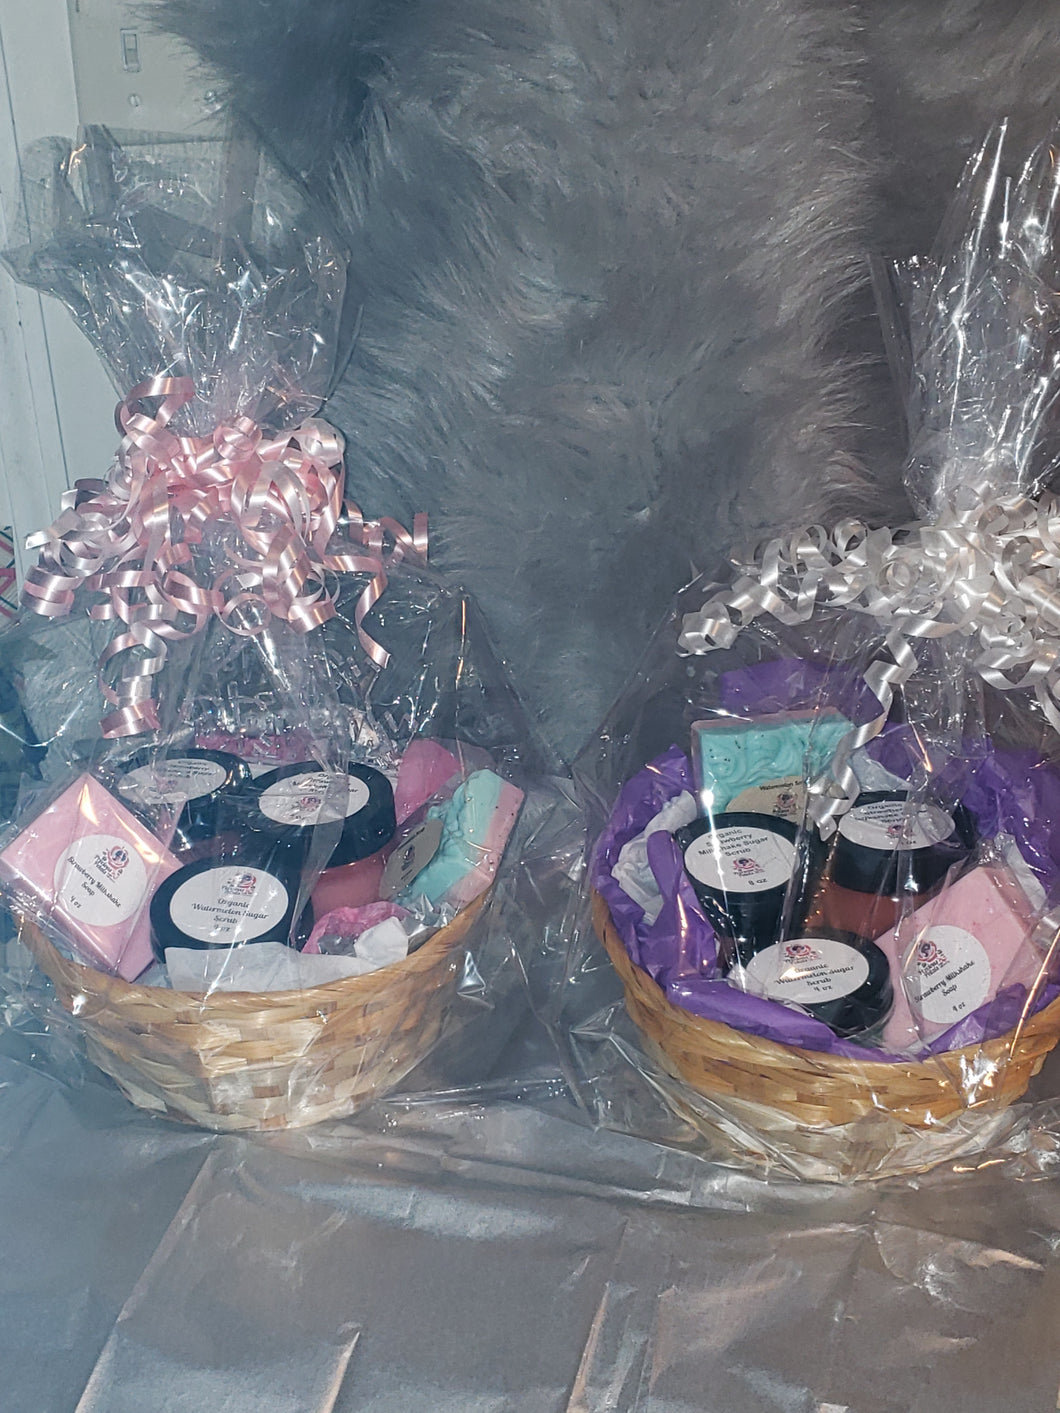 BASKETS***Organic Baskets for Adults and Children-Birthdays, Holidays, Special Occasions prices ranging from $25 and Up